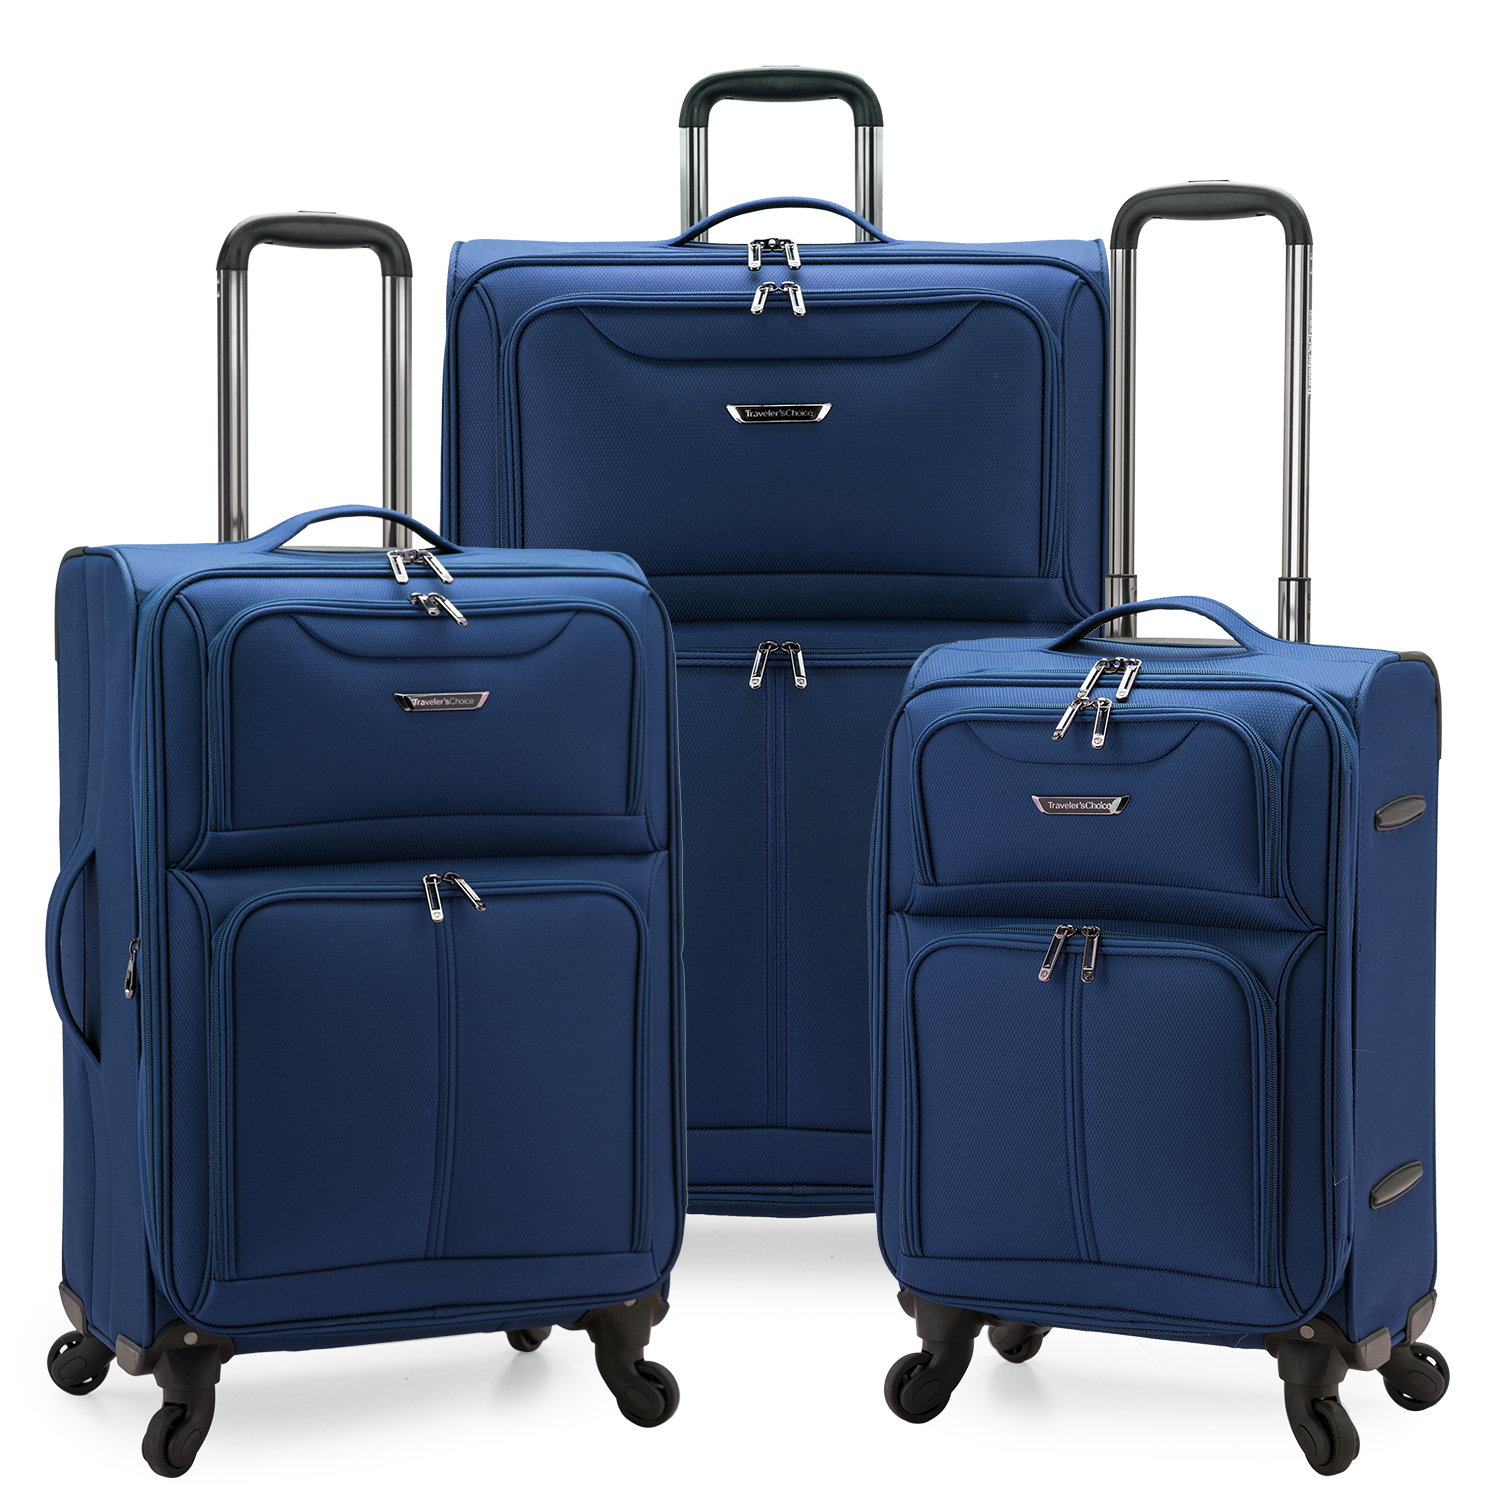 Airway Travel Luggage – Golden Pacific